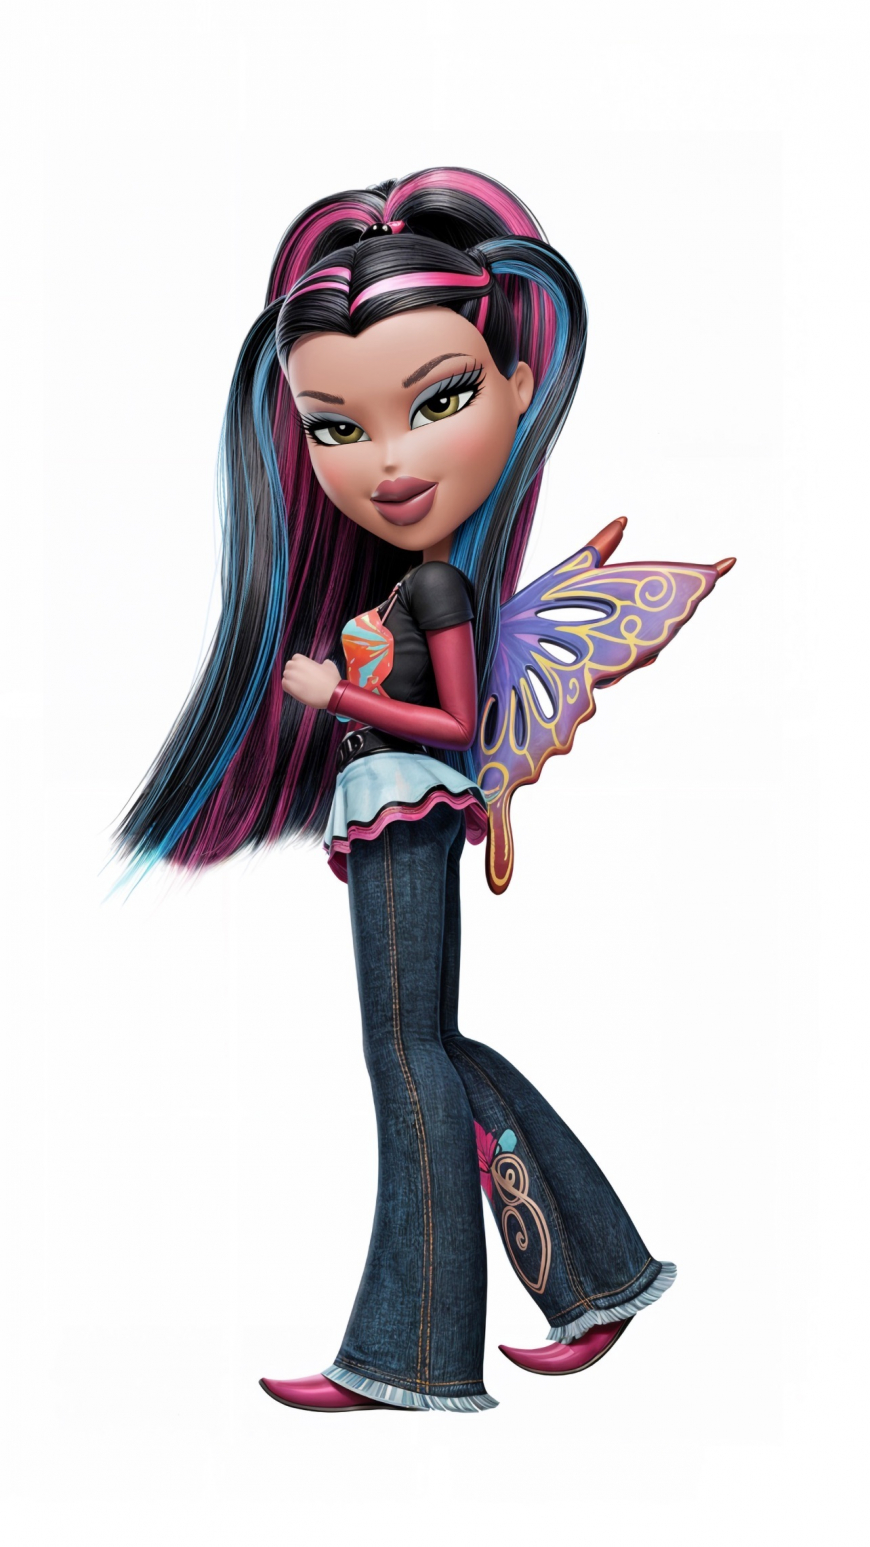 Bratz Fashion Pixiez new 3d models in pictures backgrounds, wallpapers